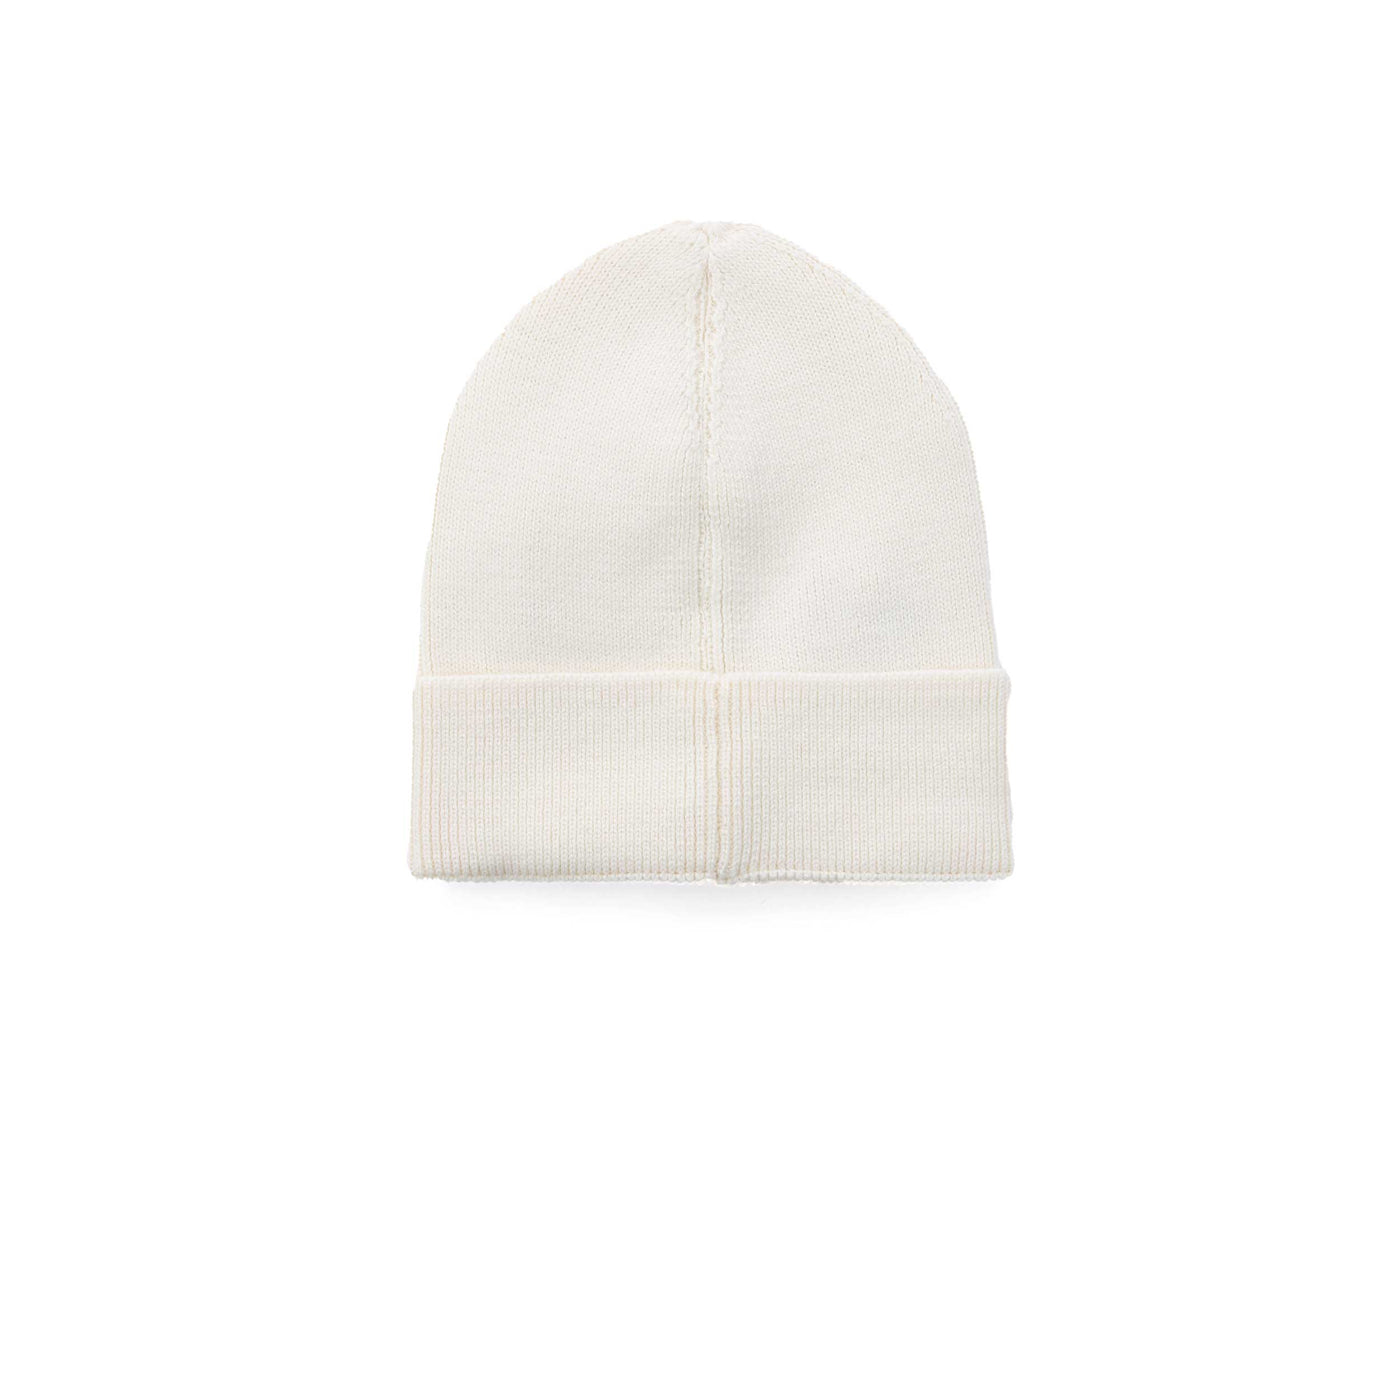 BOSS Foxxy 1 Beanie Hat in Natural